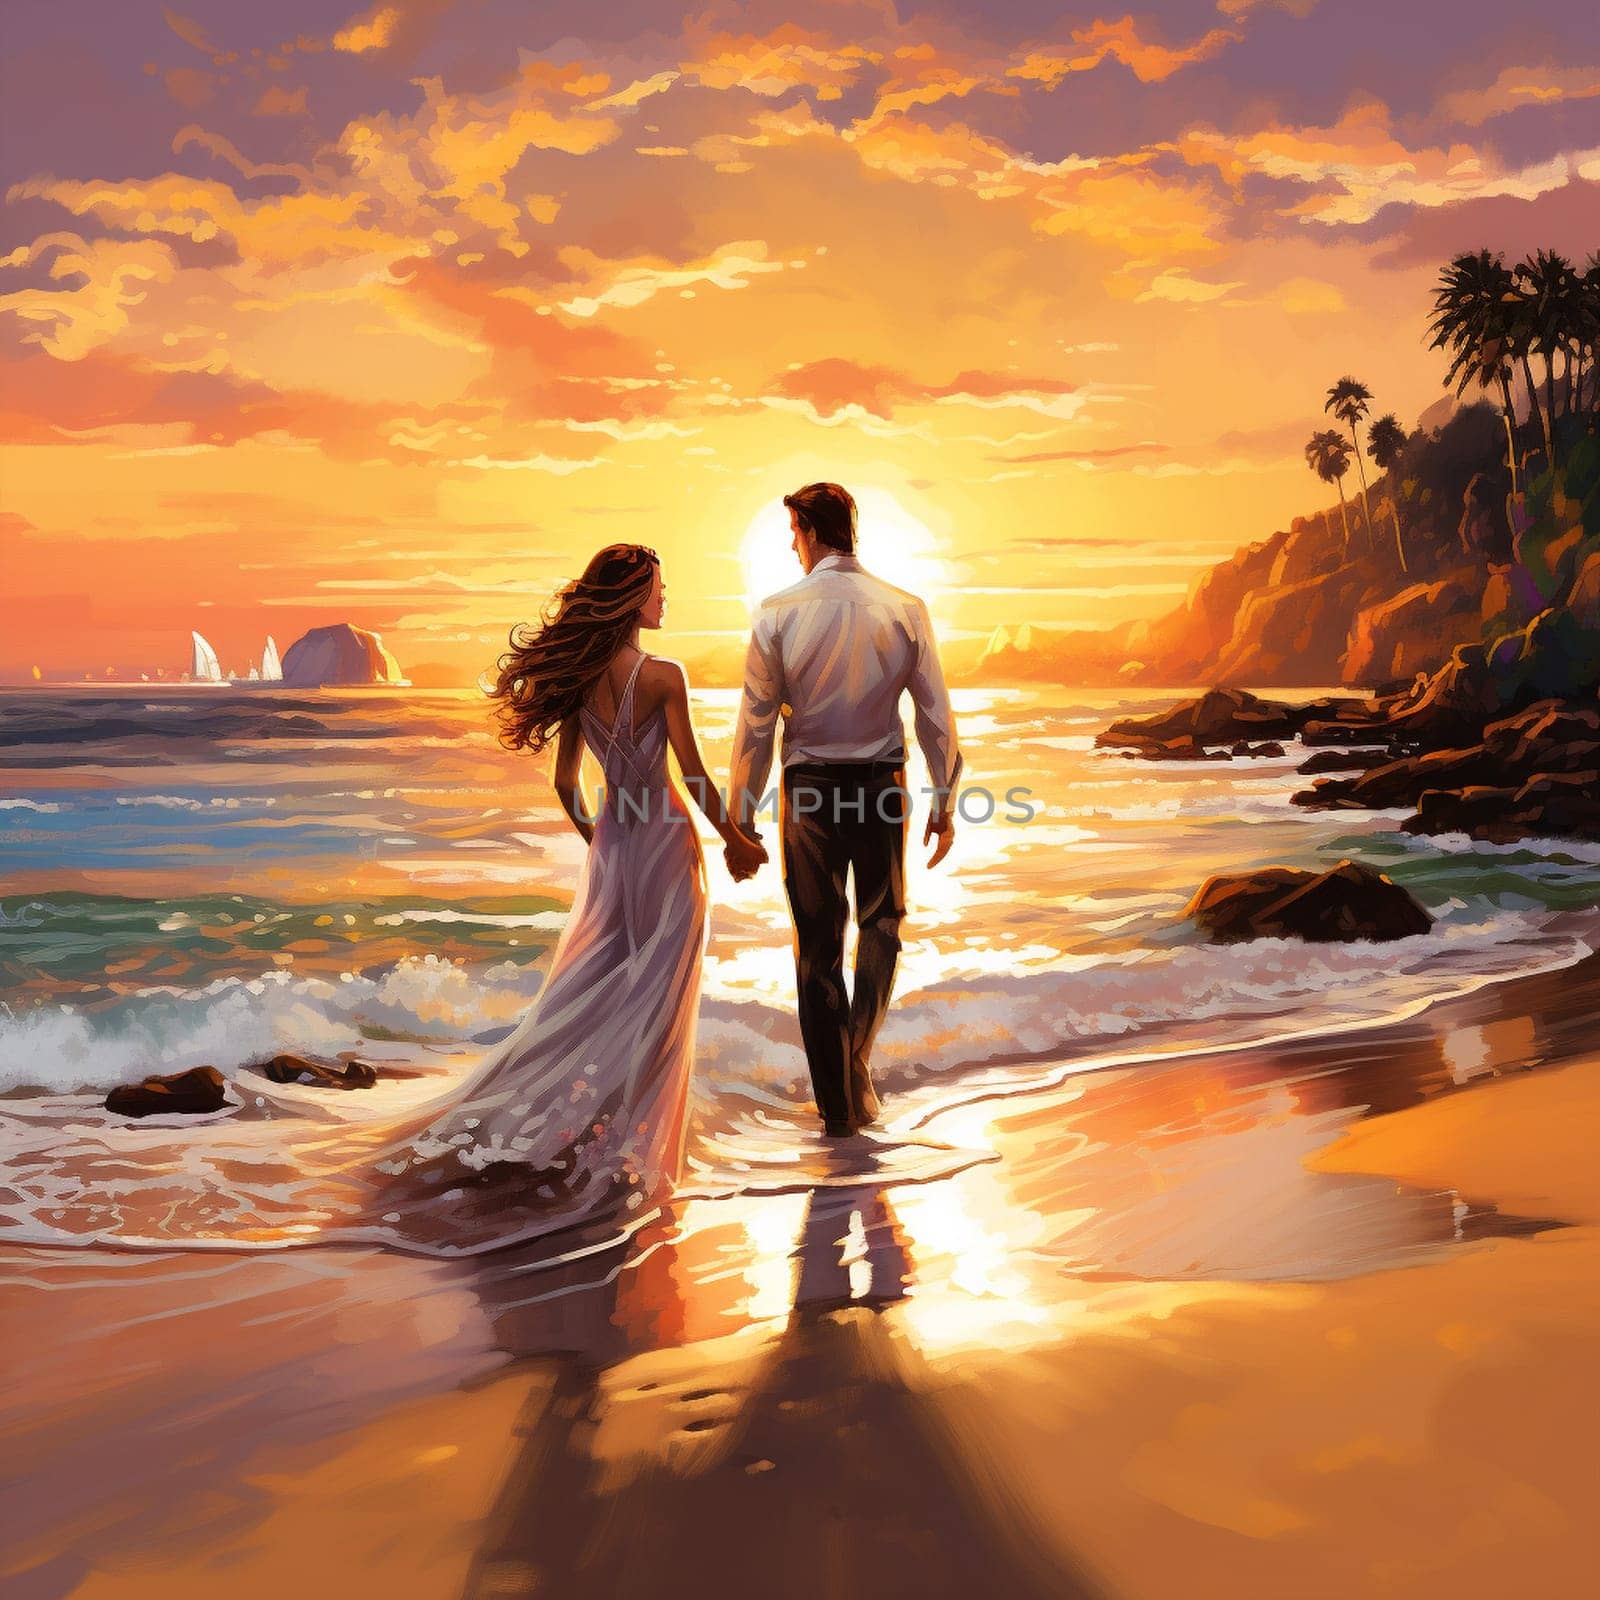 Ocean of Promises: An Everlasting Vow Exchange by Sahin